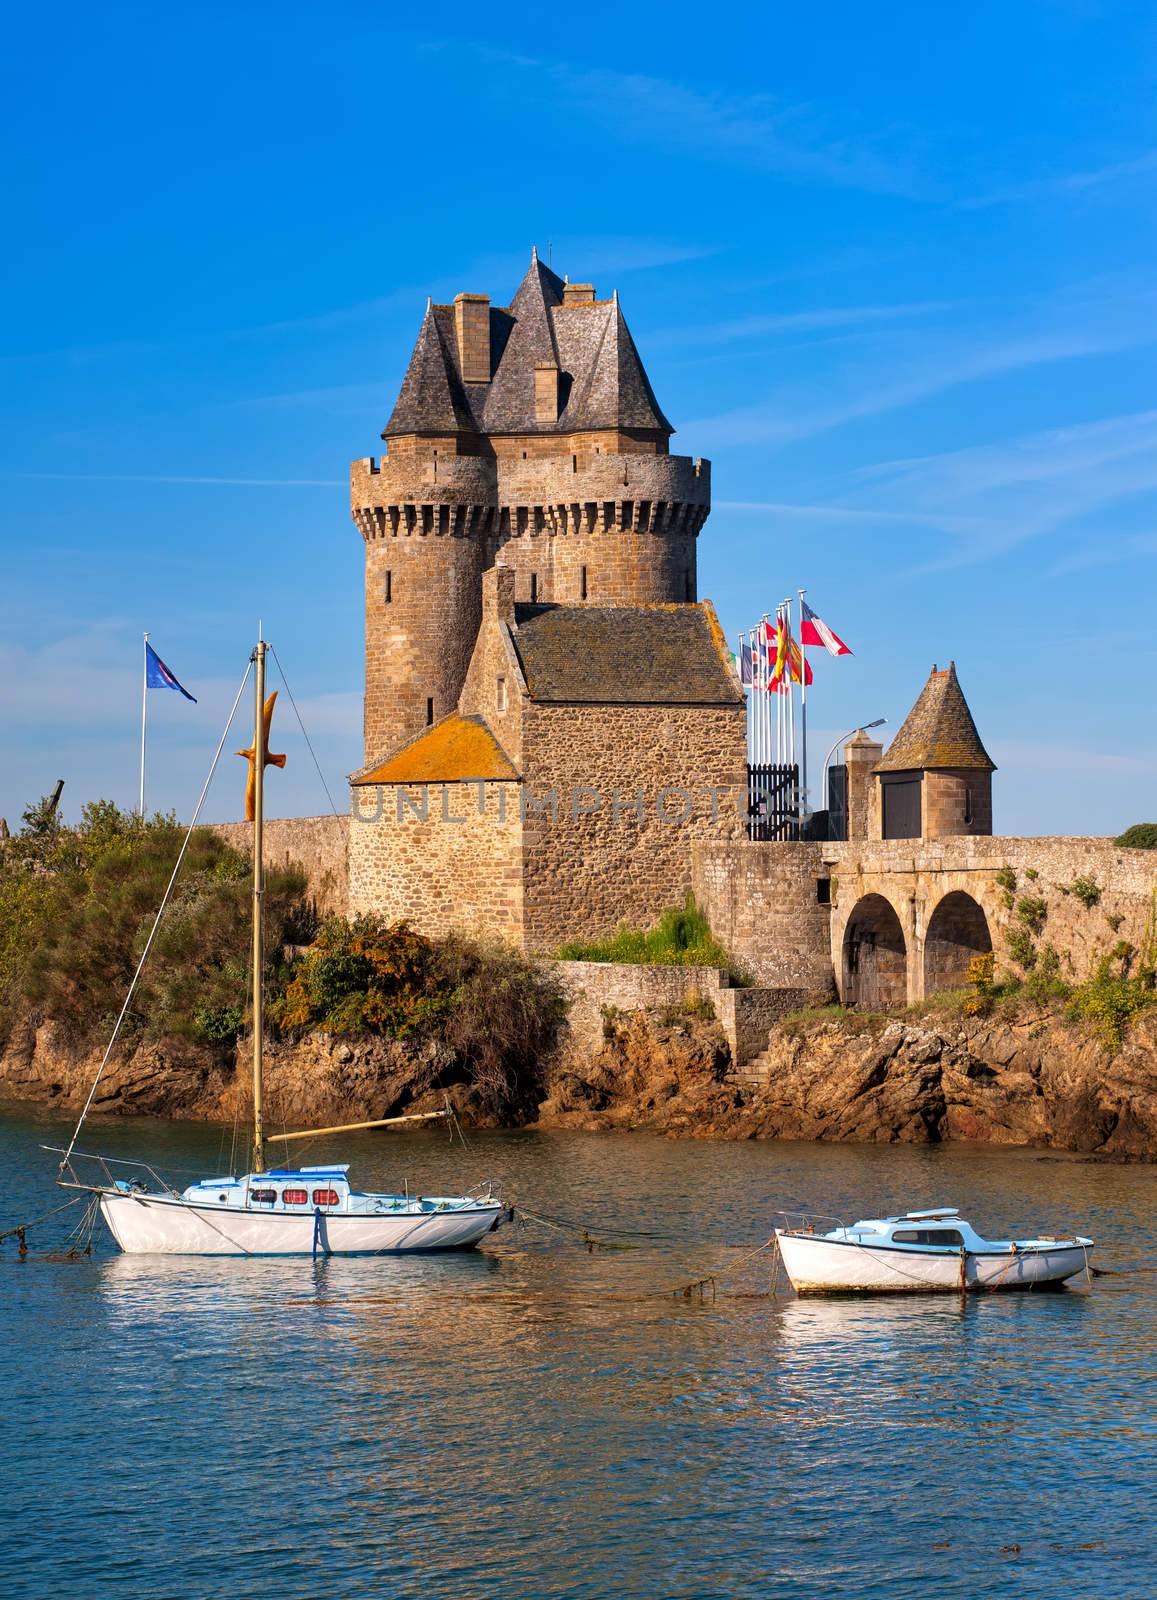 Tour Solidor, a medieval fortified tower in Saint-Malo, Brittany, France